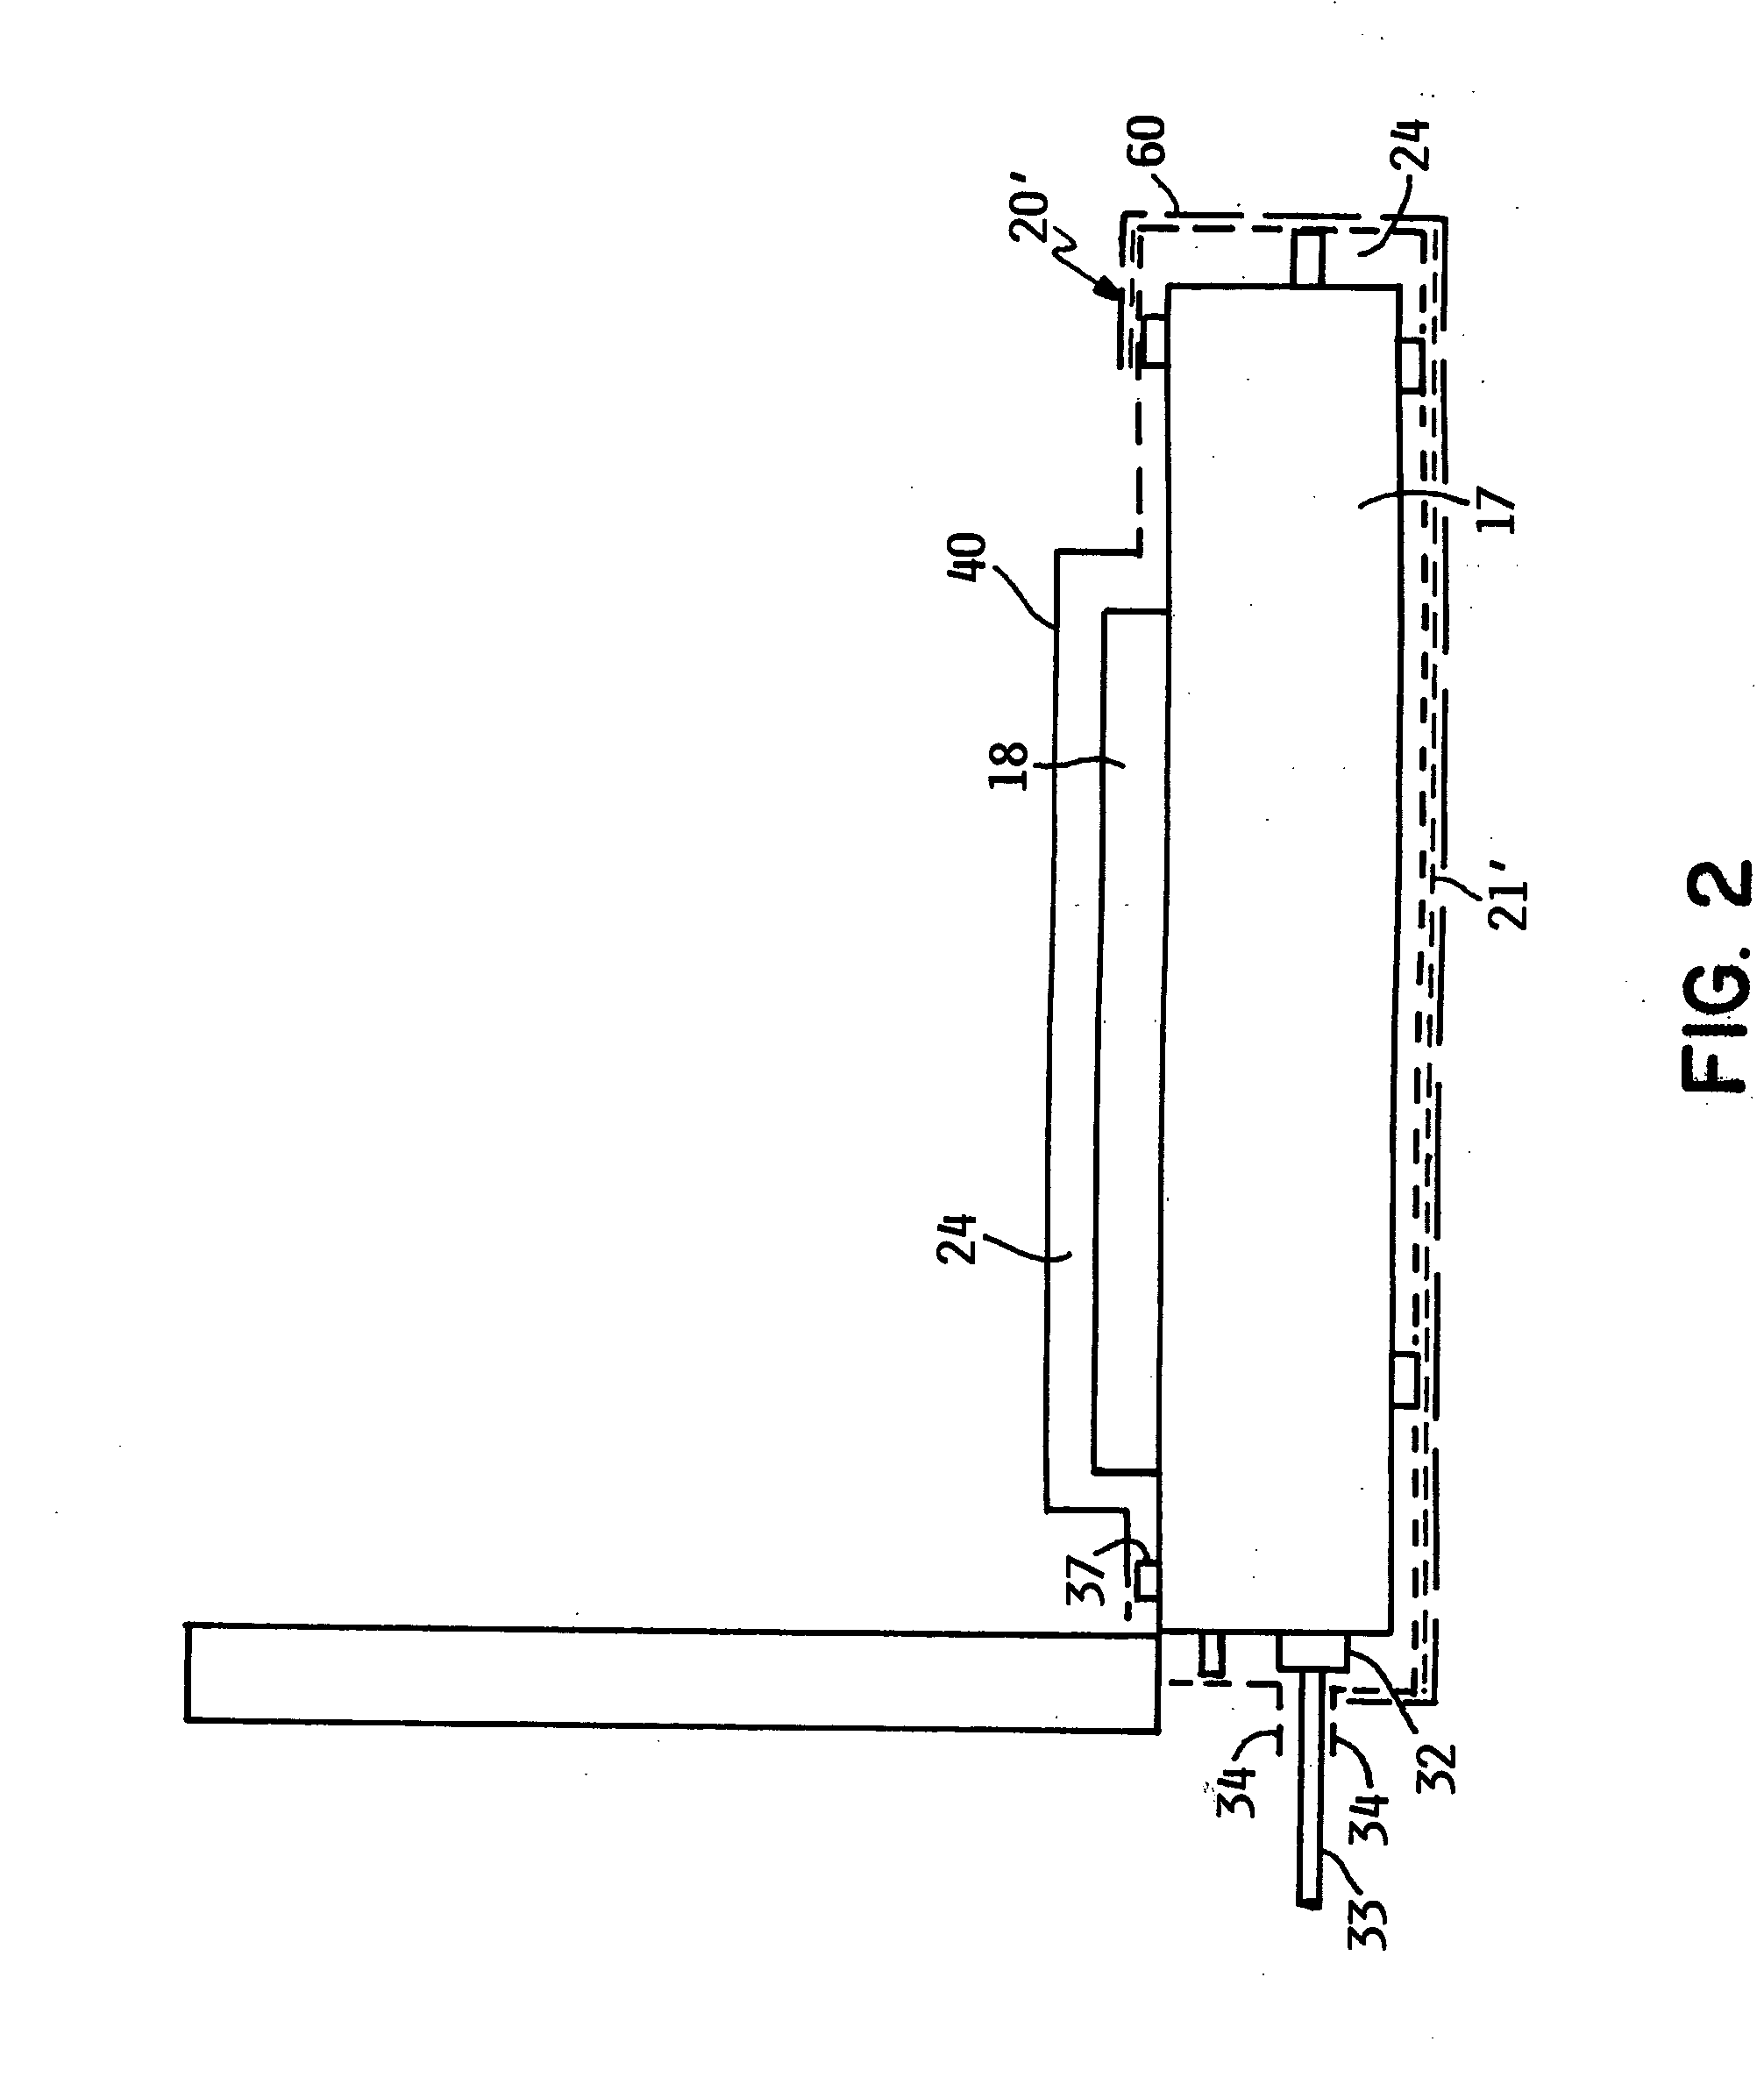 Method and apparatus for protecting electronic devices against particulate infiltration, excessive heat build-up, and for implementing EMC shielding